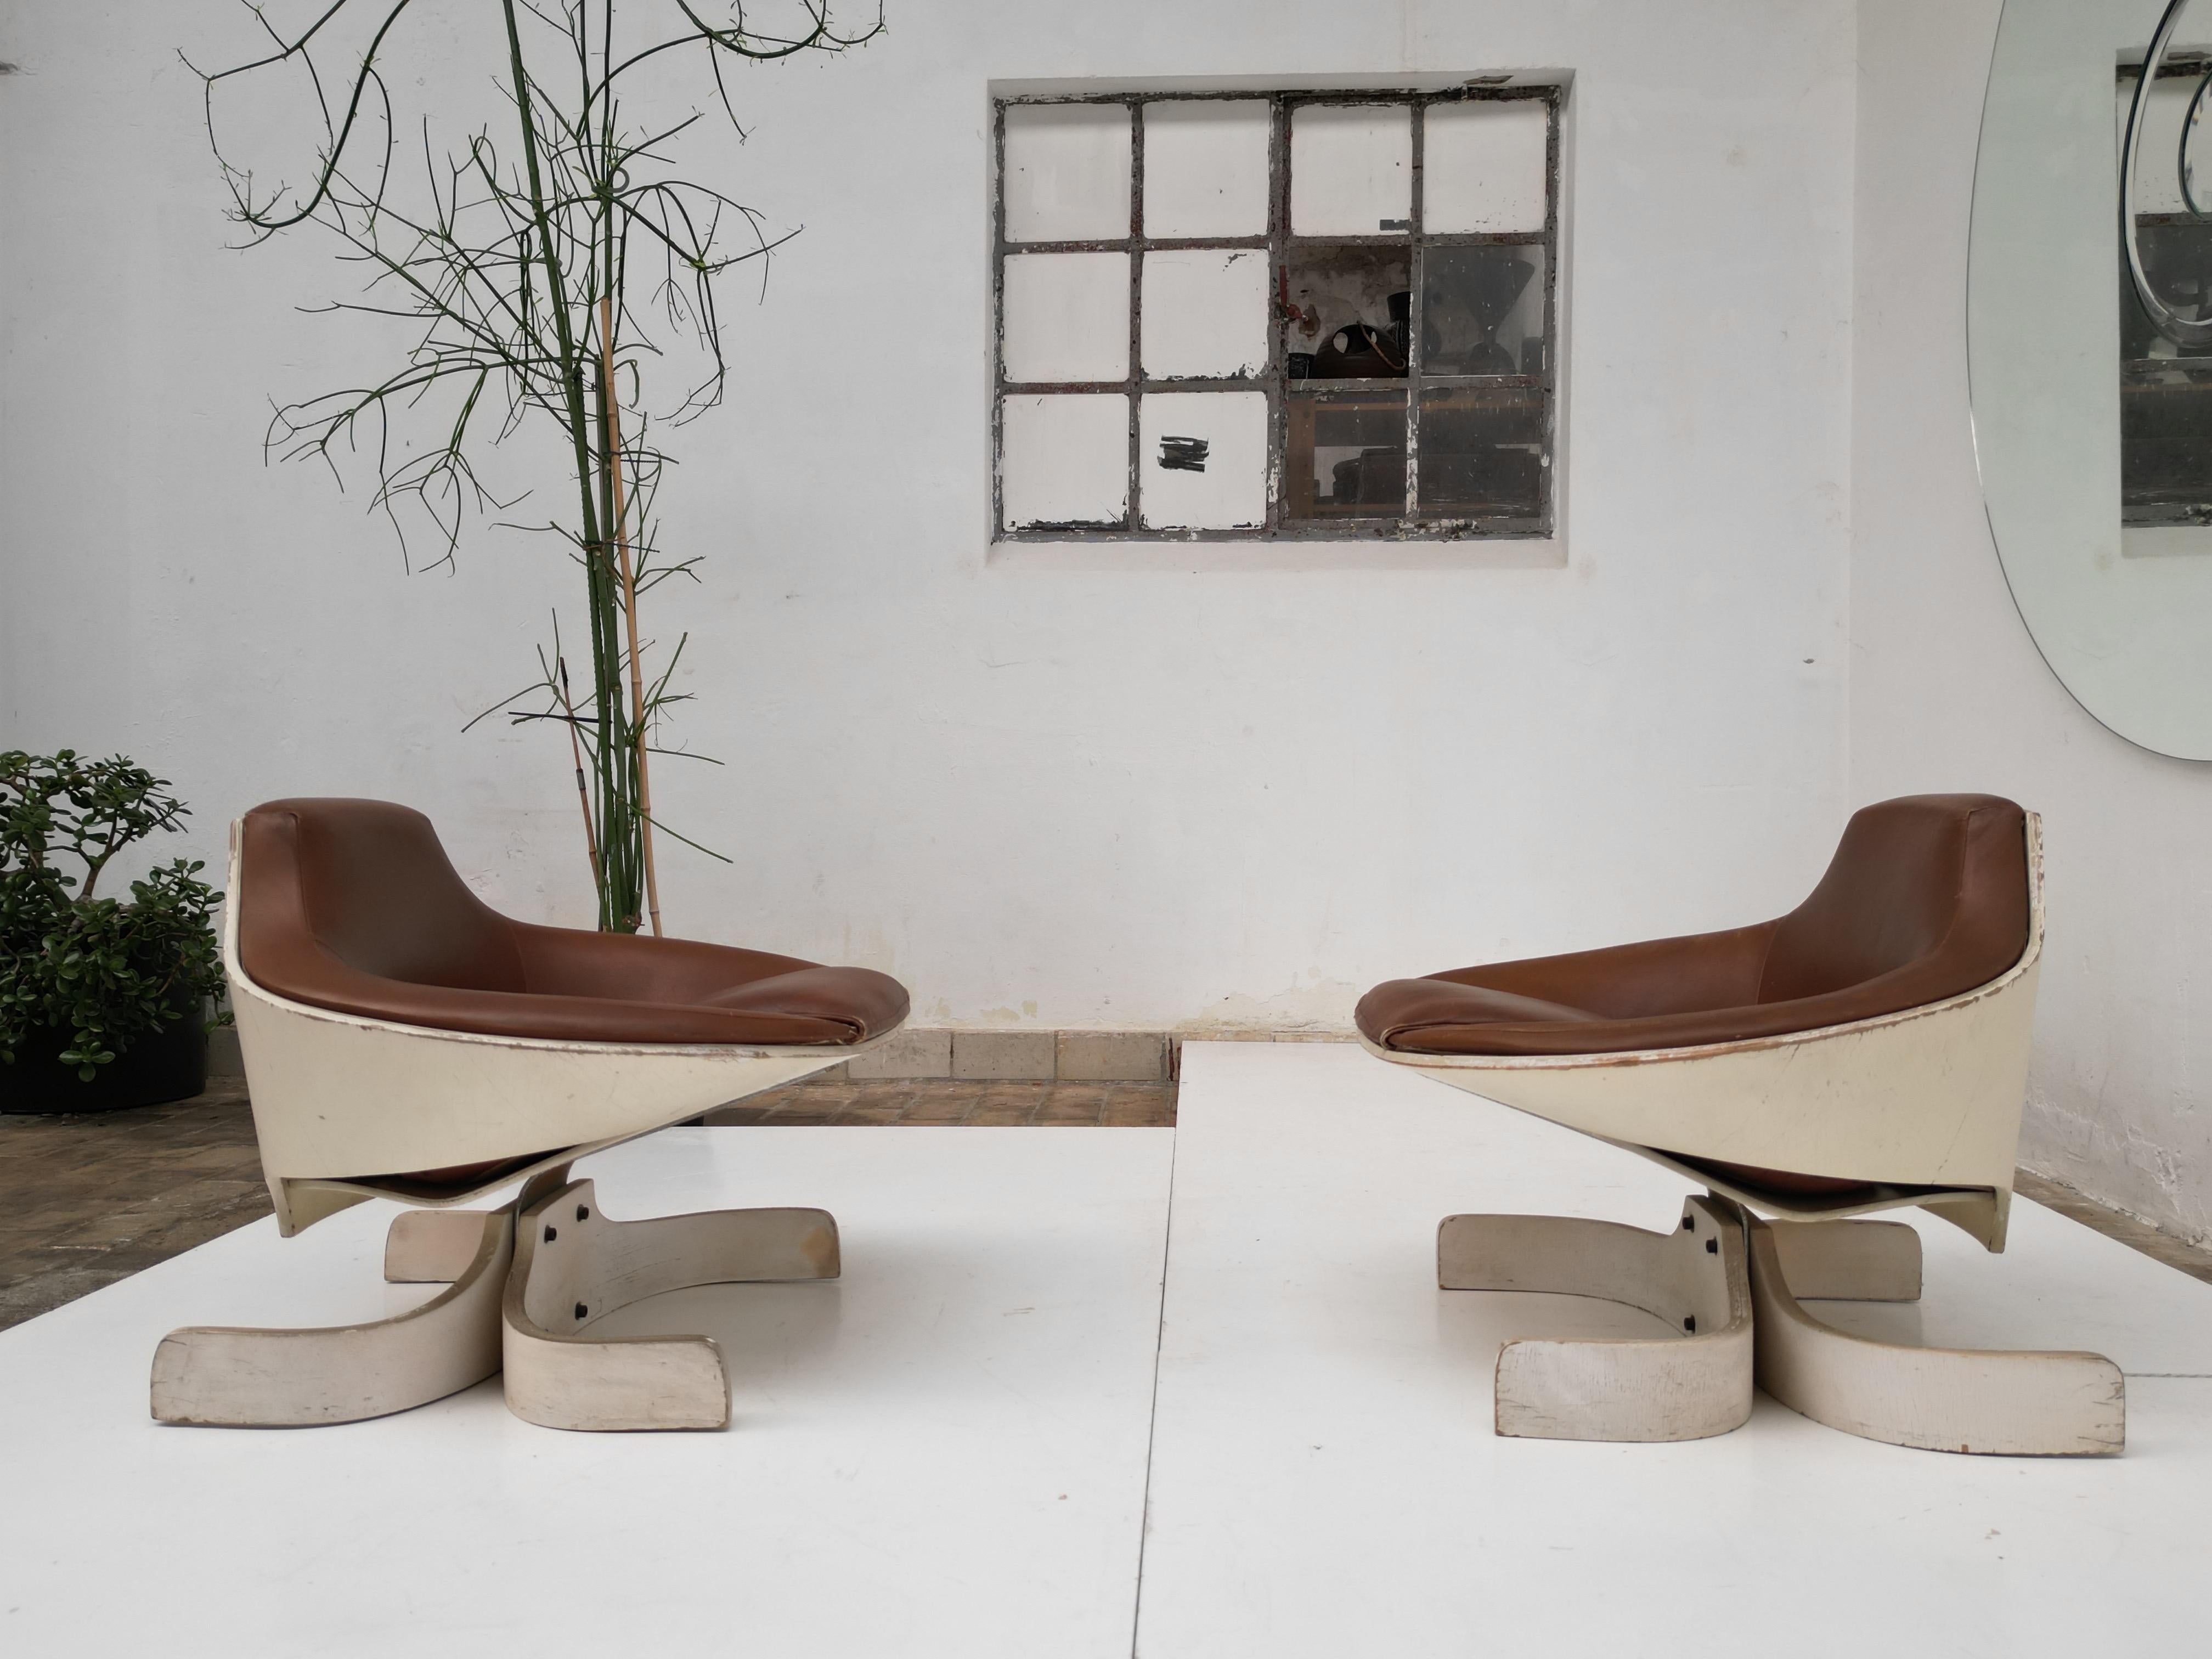 Super Rare Pair of Joe Colombo 'Sella 1001' Lounge Chairs by Comfort 1963 Italy For Sale 1